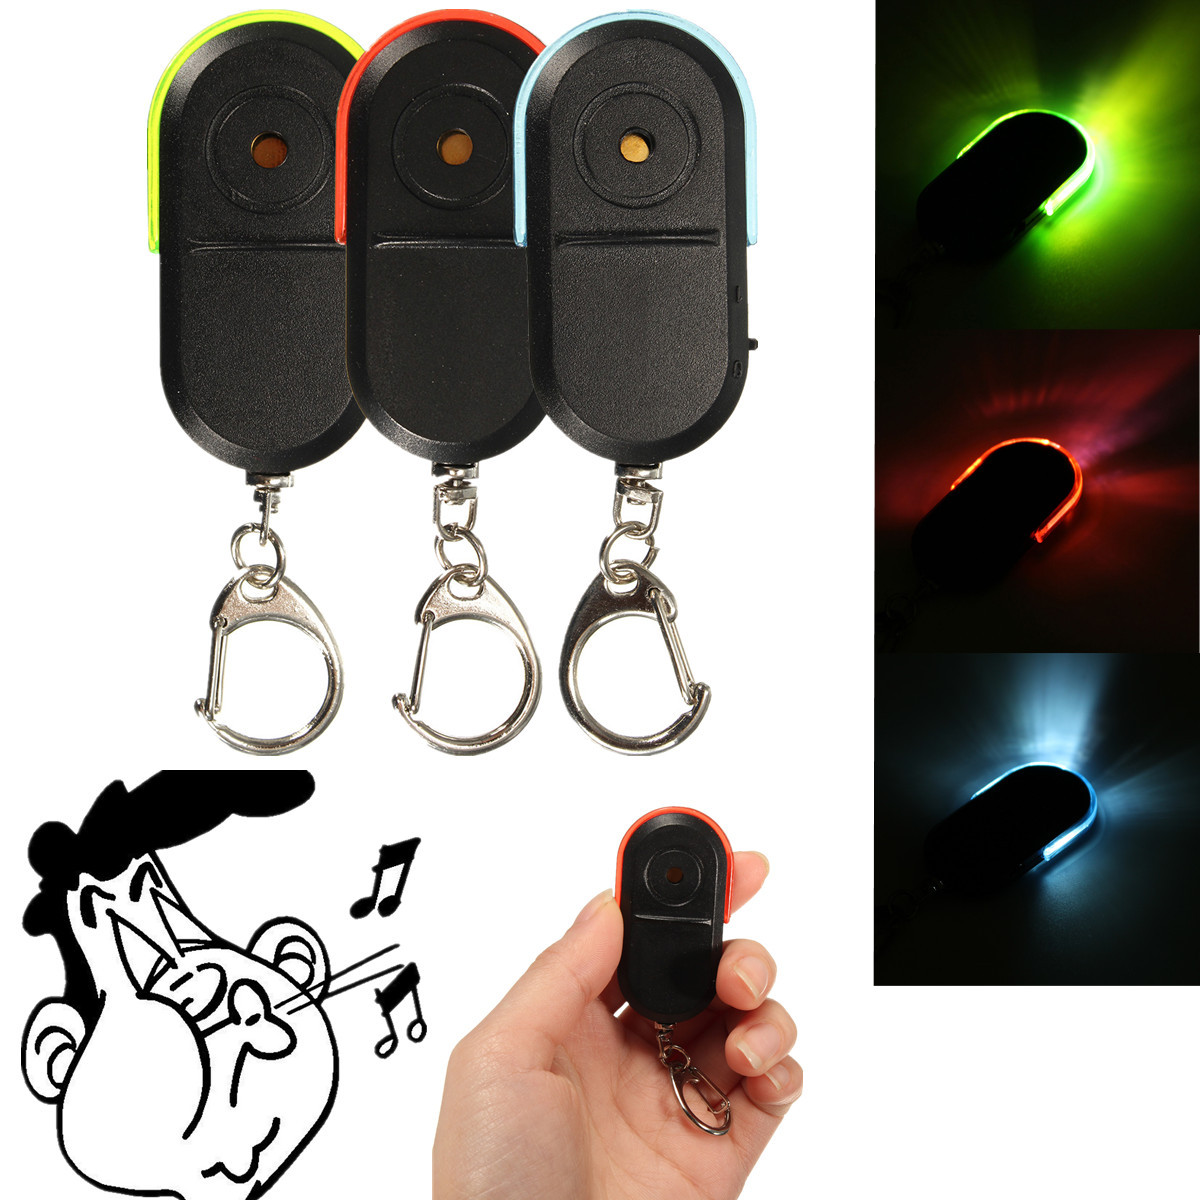 Wireless-Anti-Lost-Alarm-Key-Finder-Locator-Keychain-Whistle-Sound-with-LED-Light-1030593-1